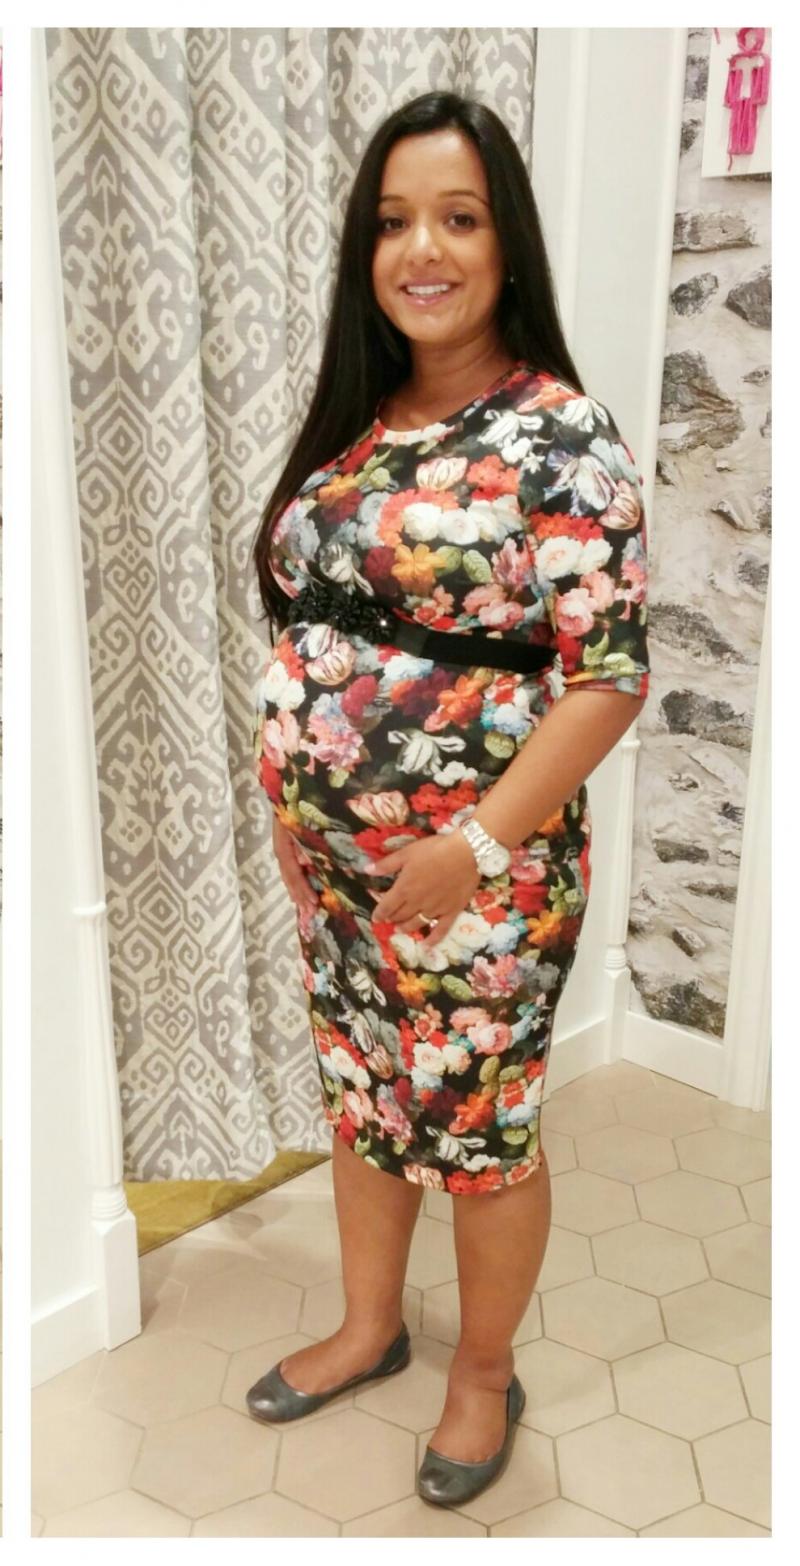 Mommies and Munchkins Zambia - Prepping for your Sunday maternity attire  can be stressful. The right kind of maternity dress can be all the comfort  you need. #maternity #maternitywearinzambia #maternitydress  #maternityclothes